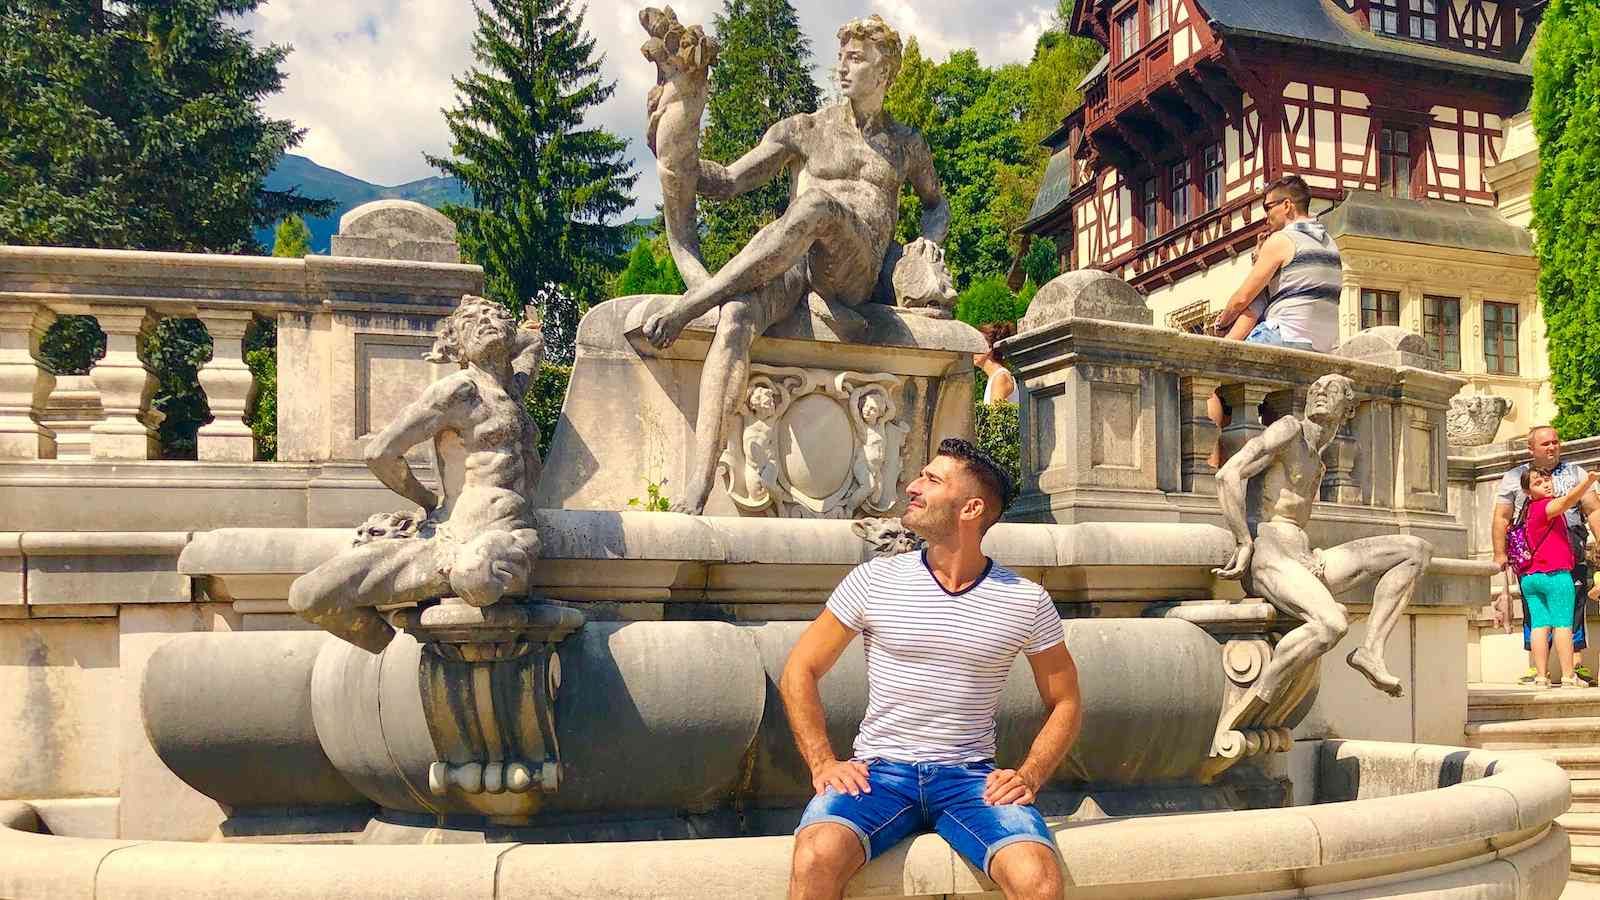 Peles Castle has some pretty gay looking statues!